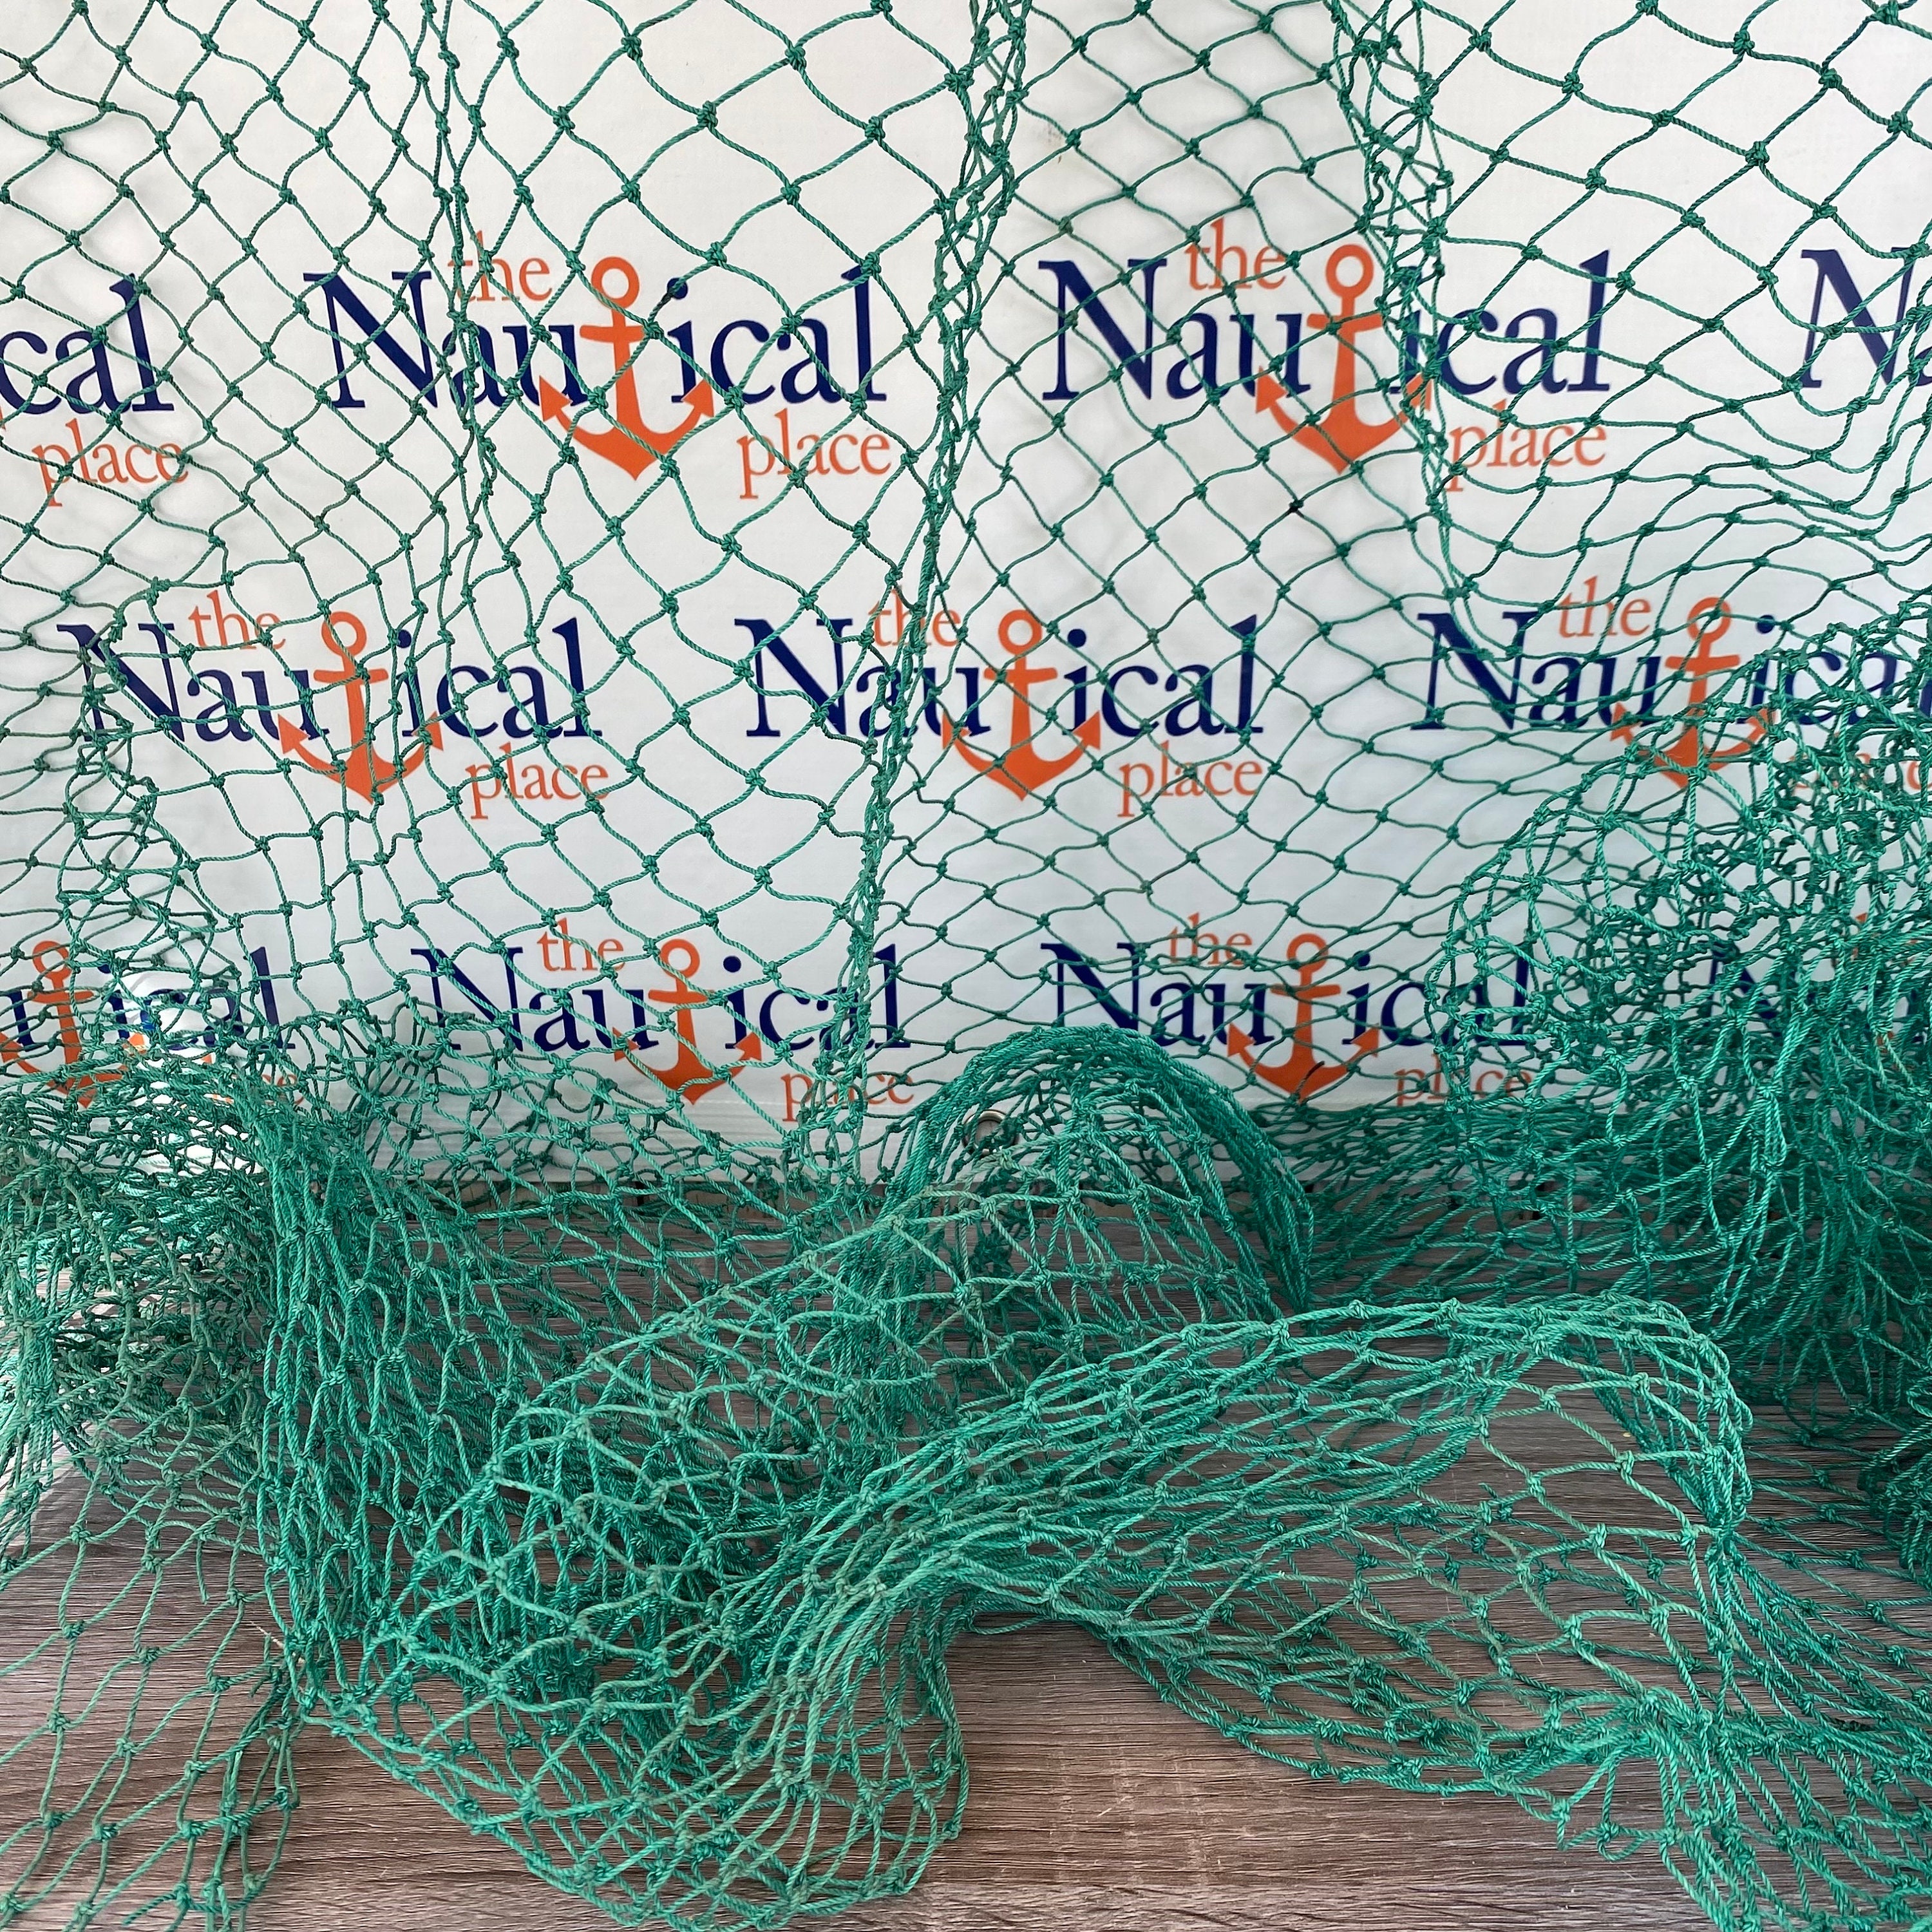 Decorative Green Fish Net - 5 ft x 8 ft Knotted - Nautical Decor